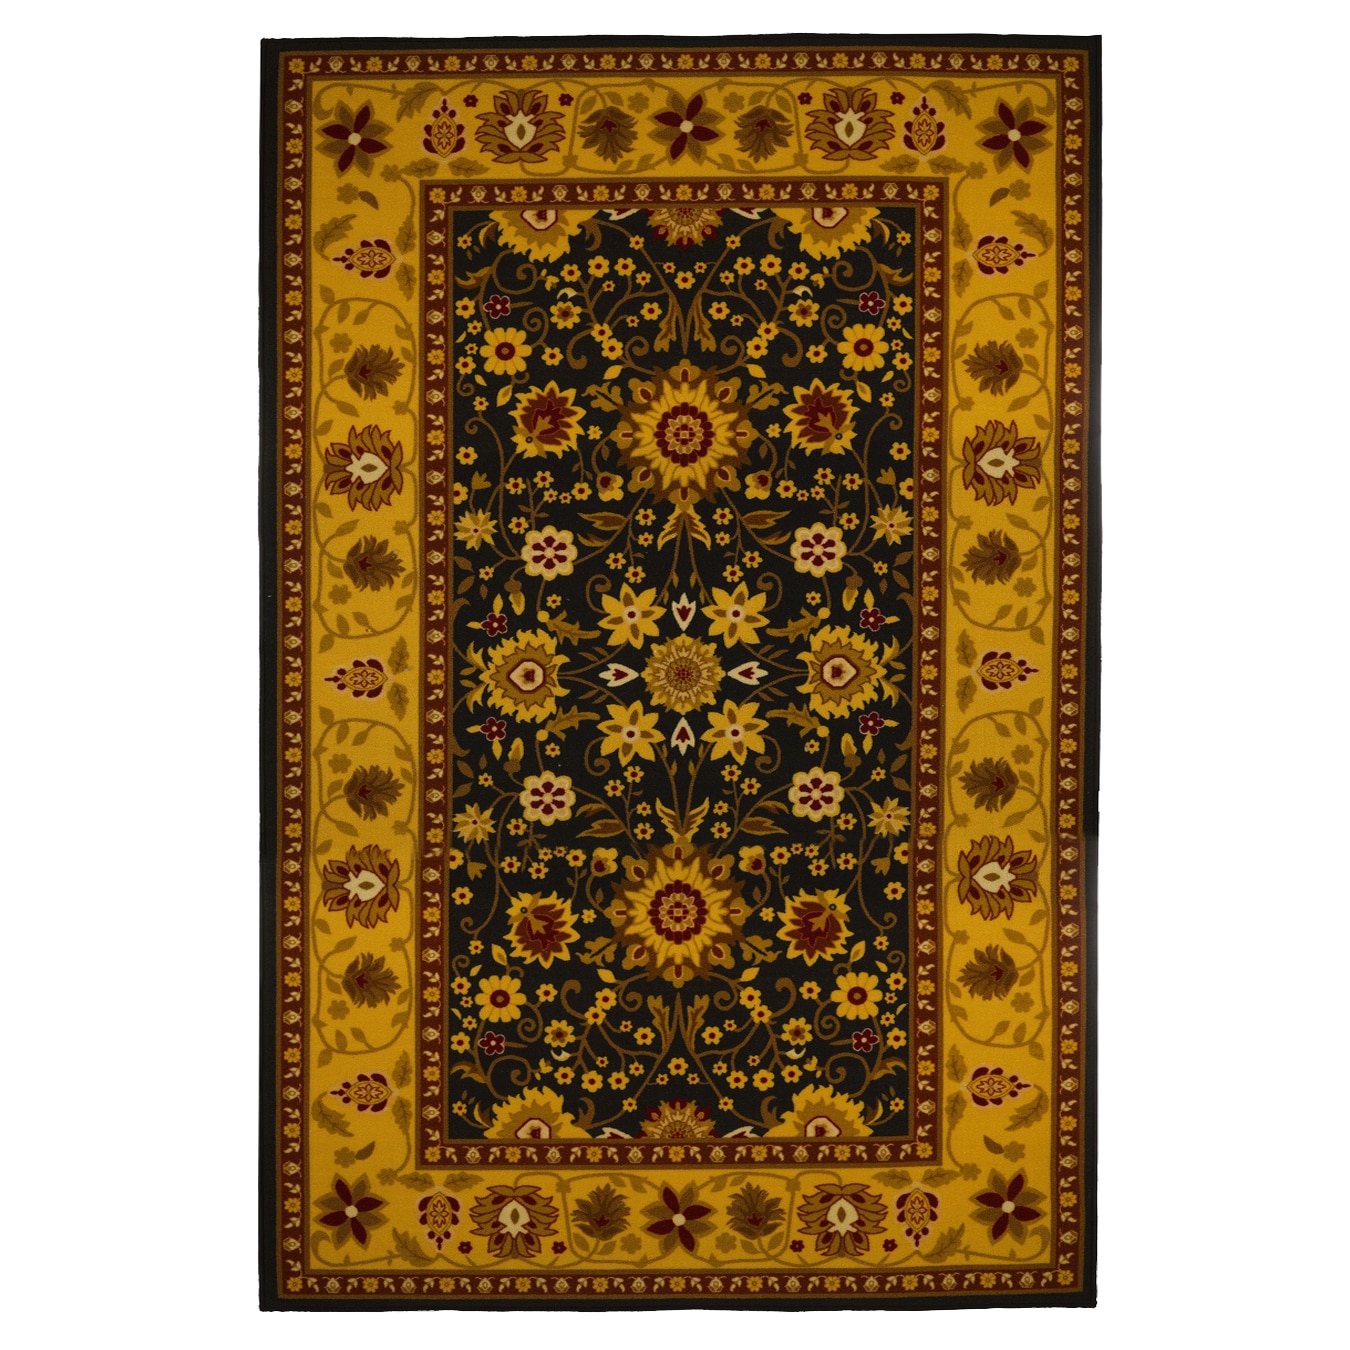 Gold/ Black Traditional Oriental Area Rug (5 X 8)